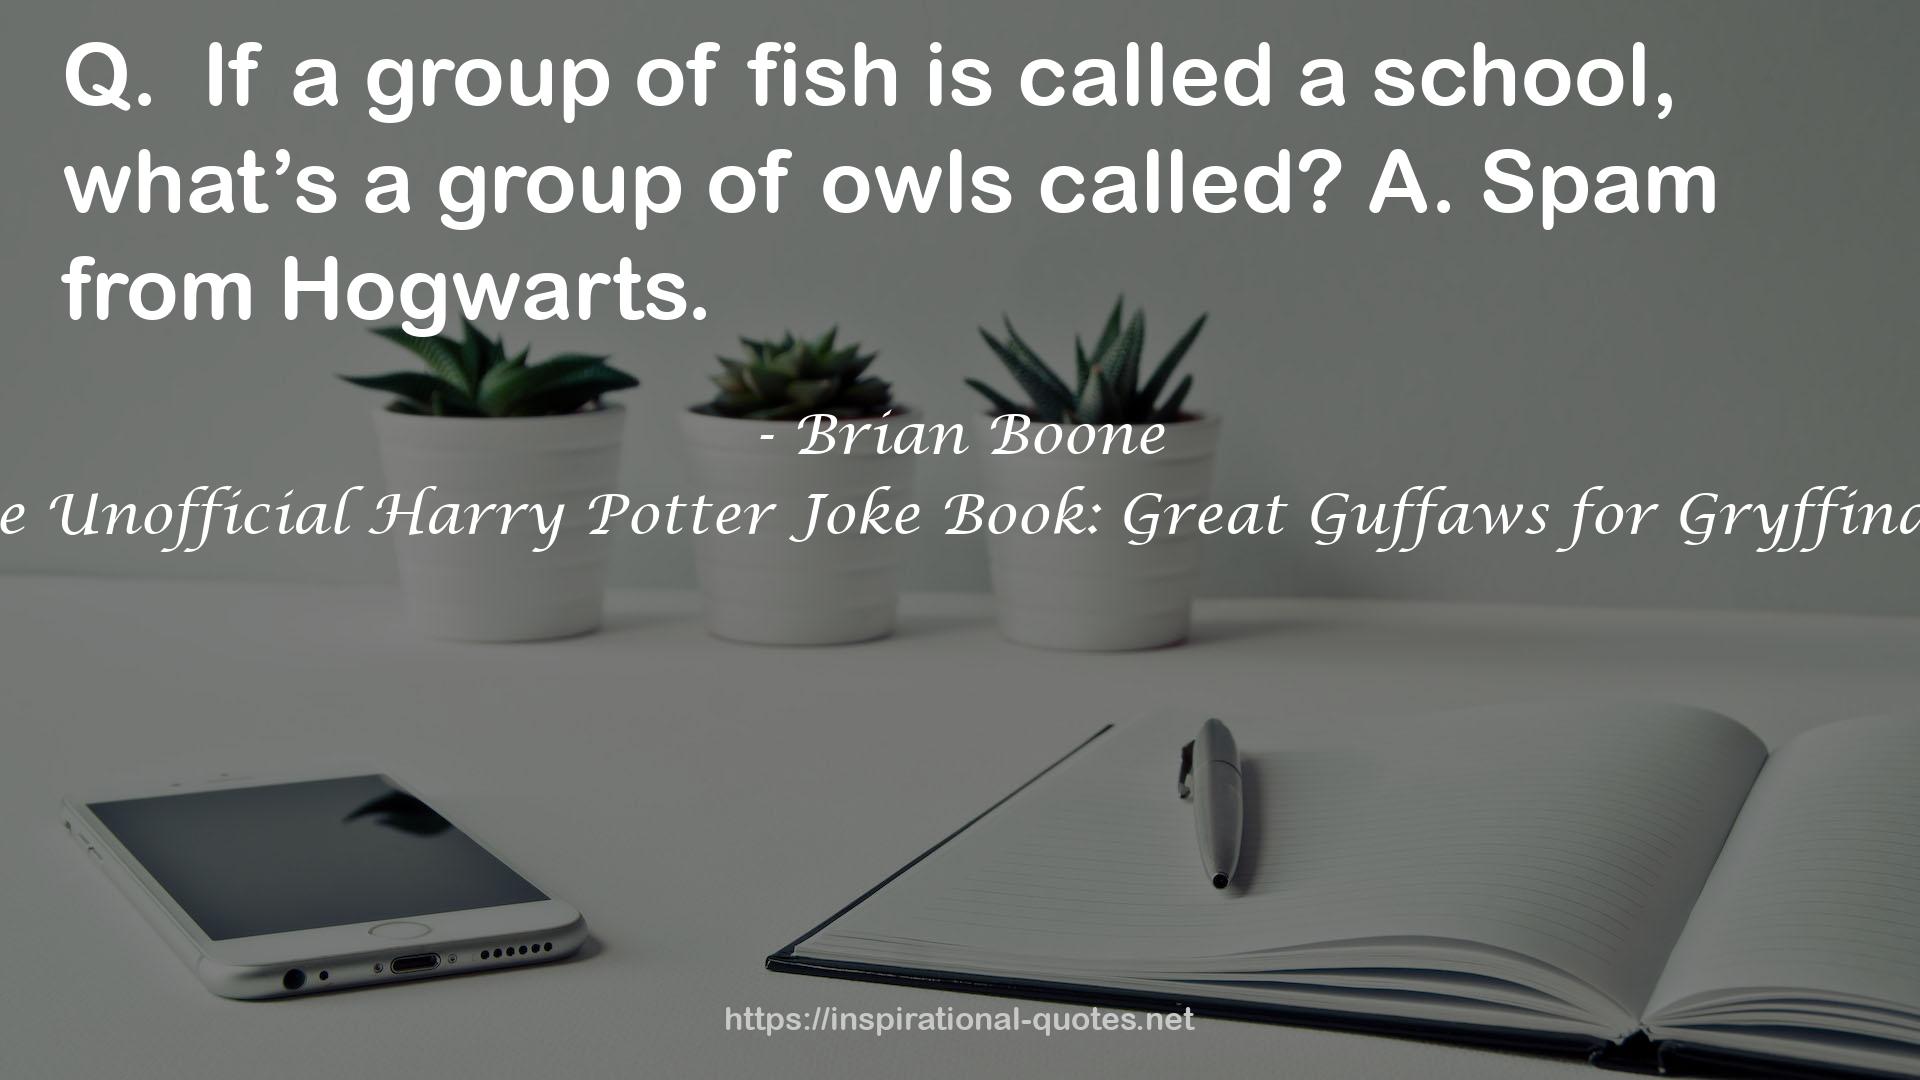 The Unofficial Harry Potter Joke Book: Great Guffaws for Gryffindor QUOTES